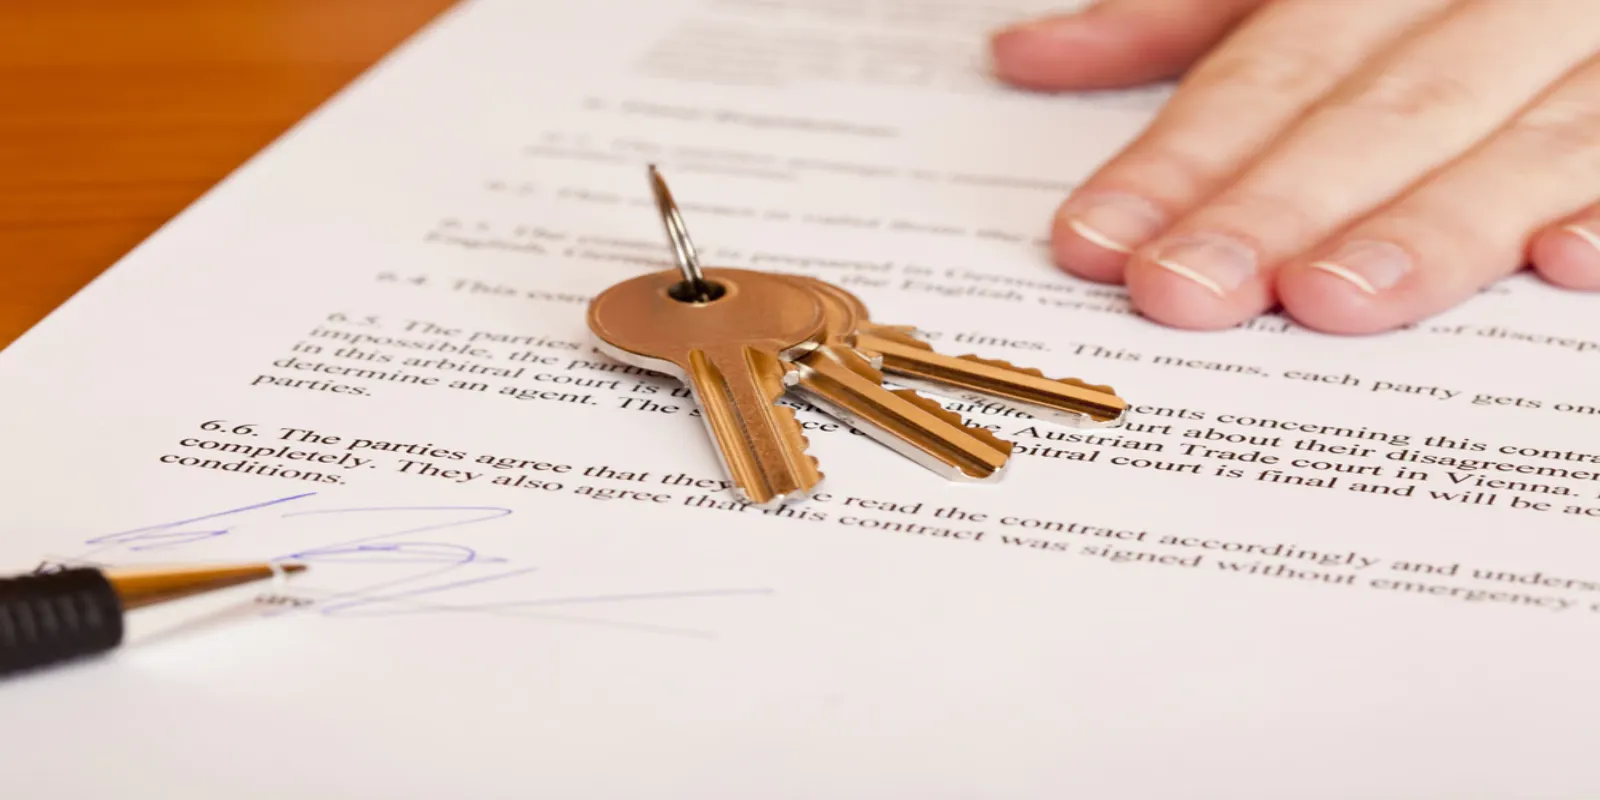 Can My Landlord Break My Lease to Sell? Find Out Your Tenant Rights